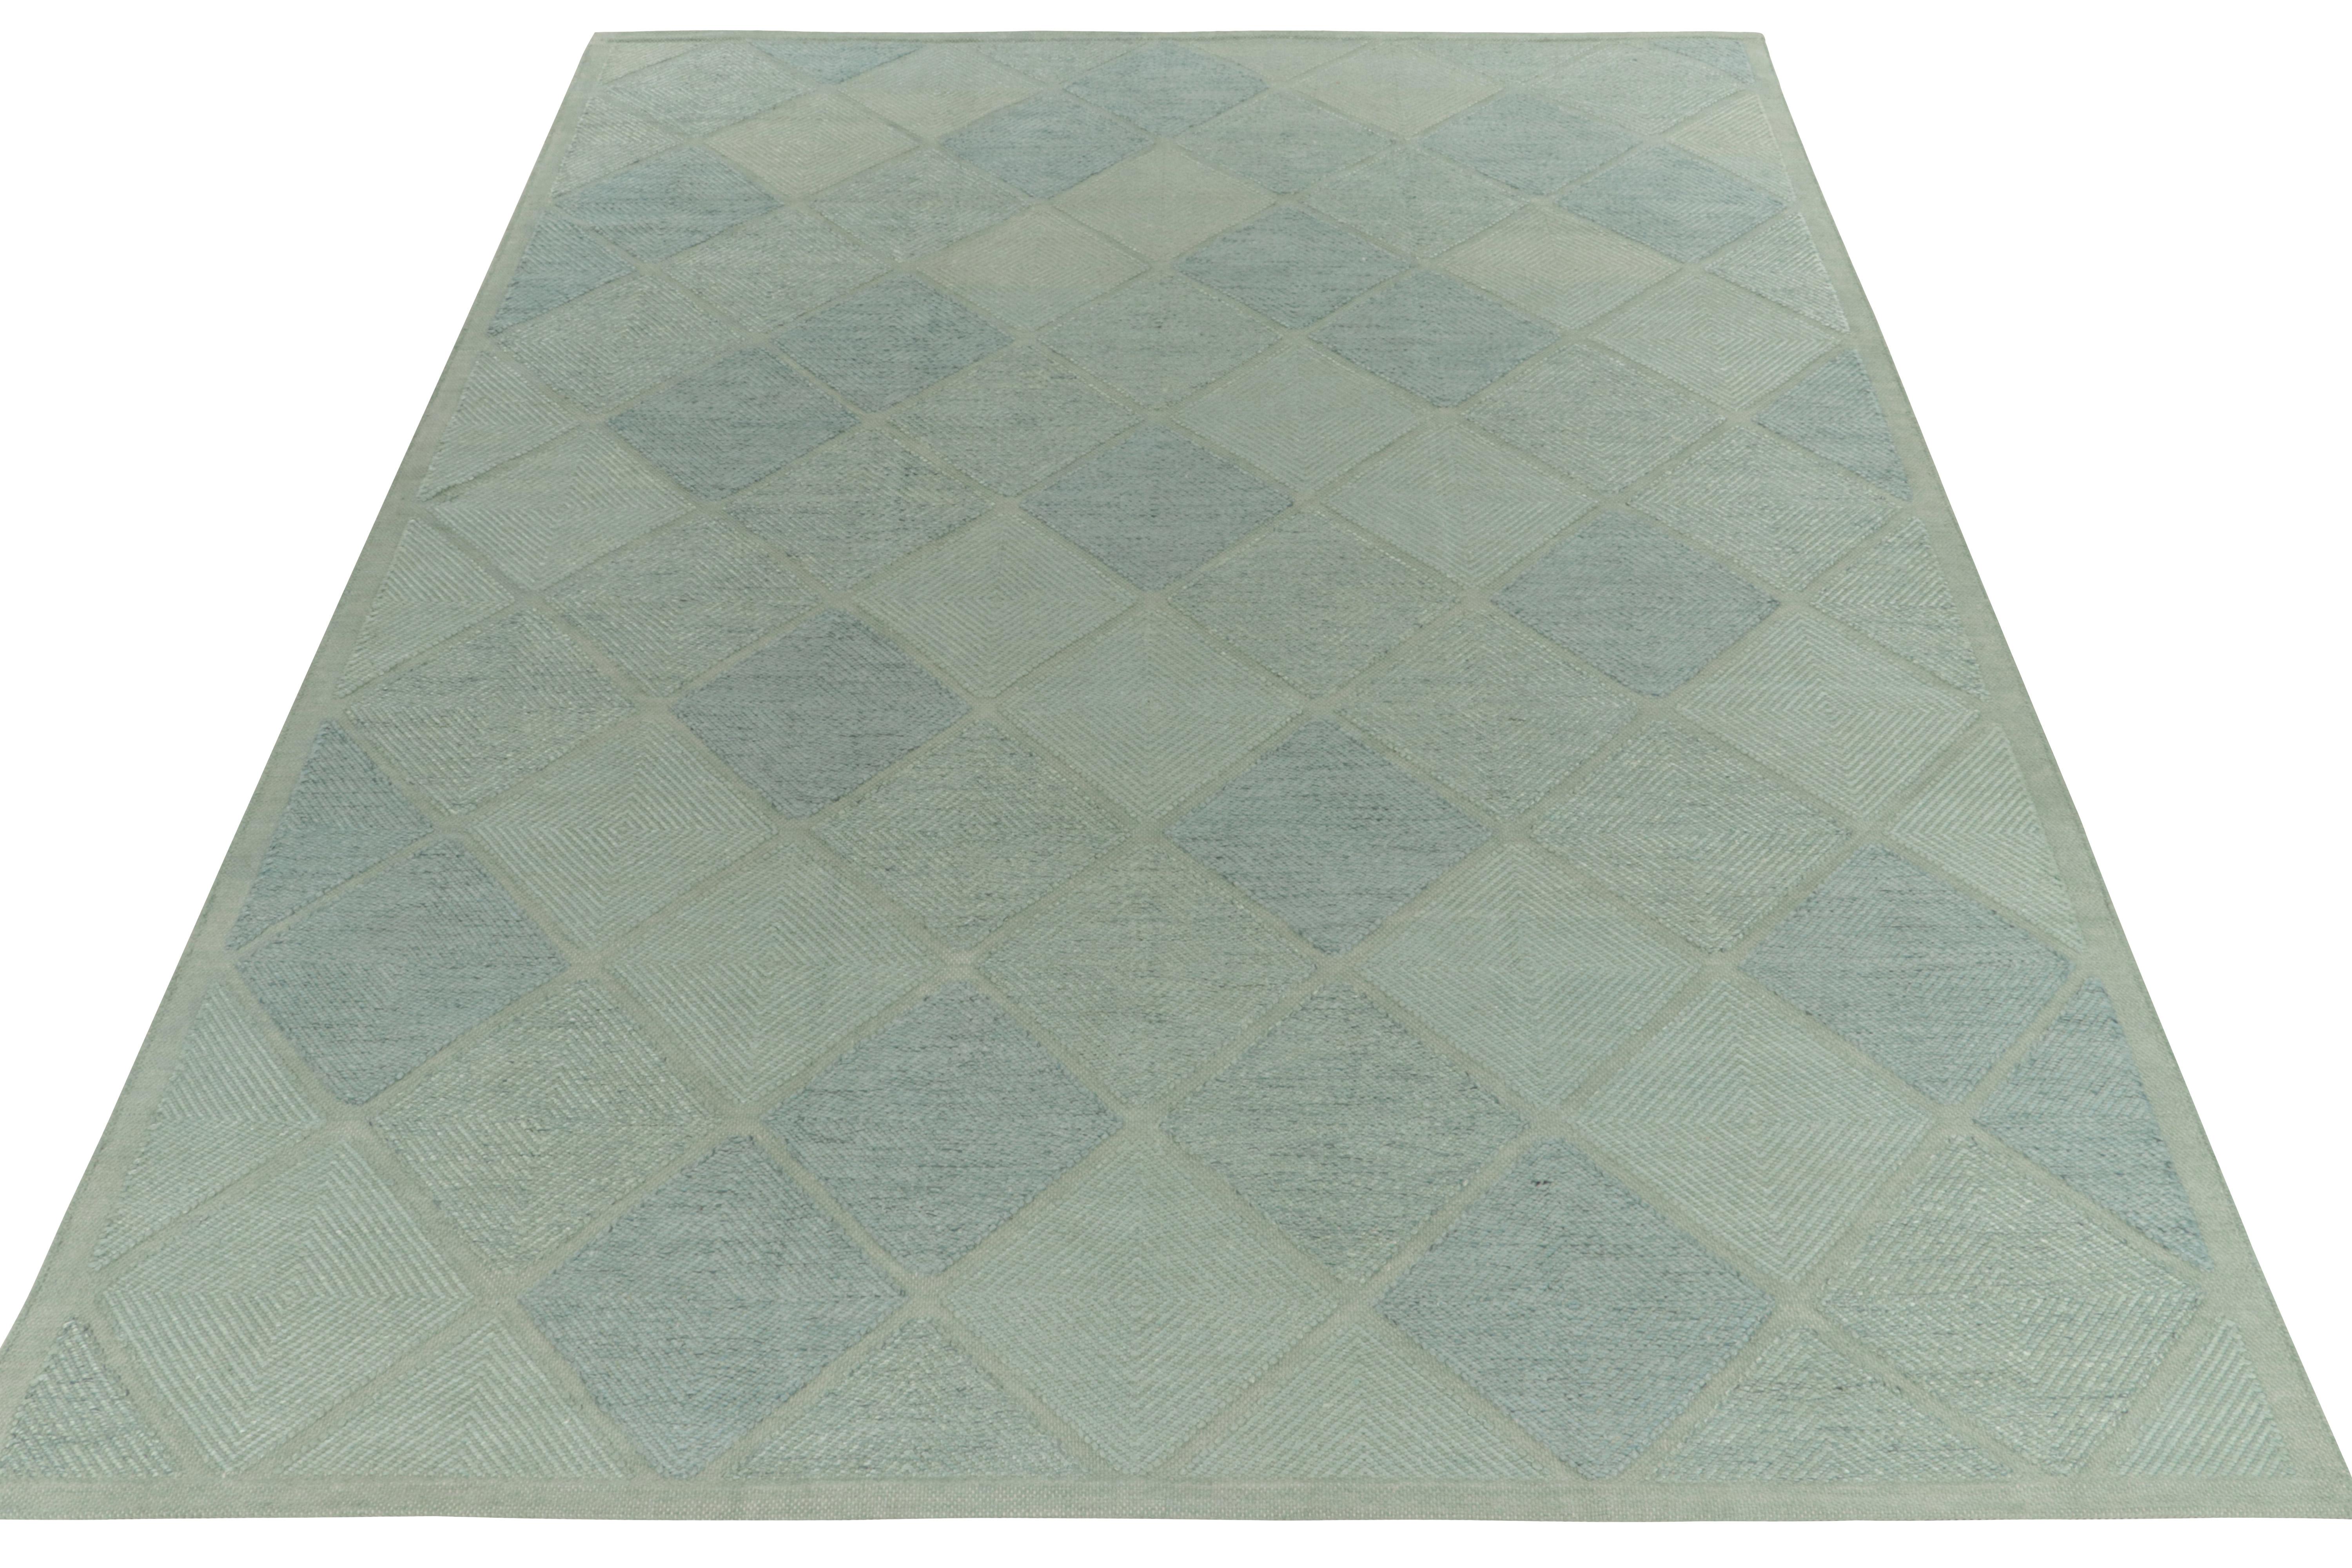 Rug & Kilim presents this exquisite 10x14 Scandinavian kilim from the Morocco line of the award-winning flat weave texture; a unique contemporary approach to Swedish Modernism. The handwoven piece flows in an all over diamond pattern in a delightful